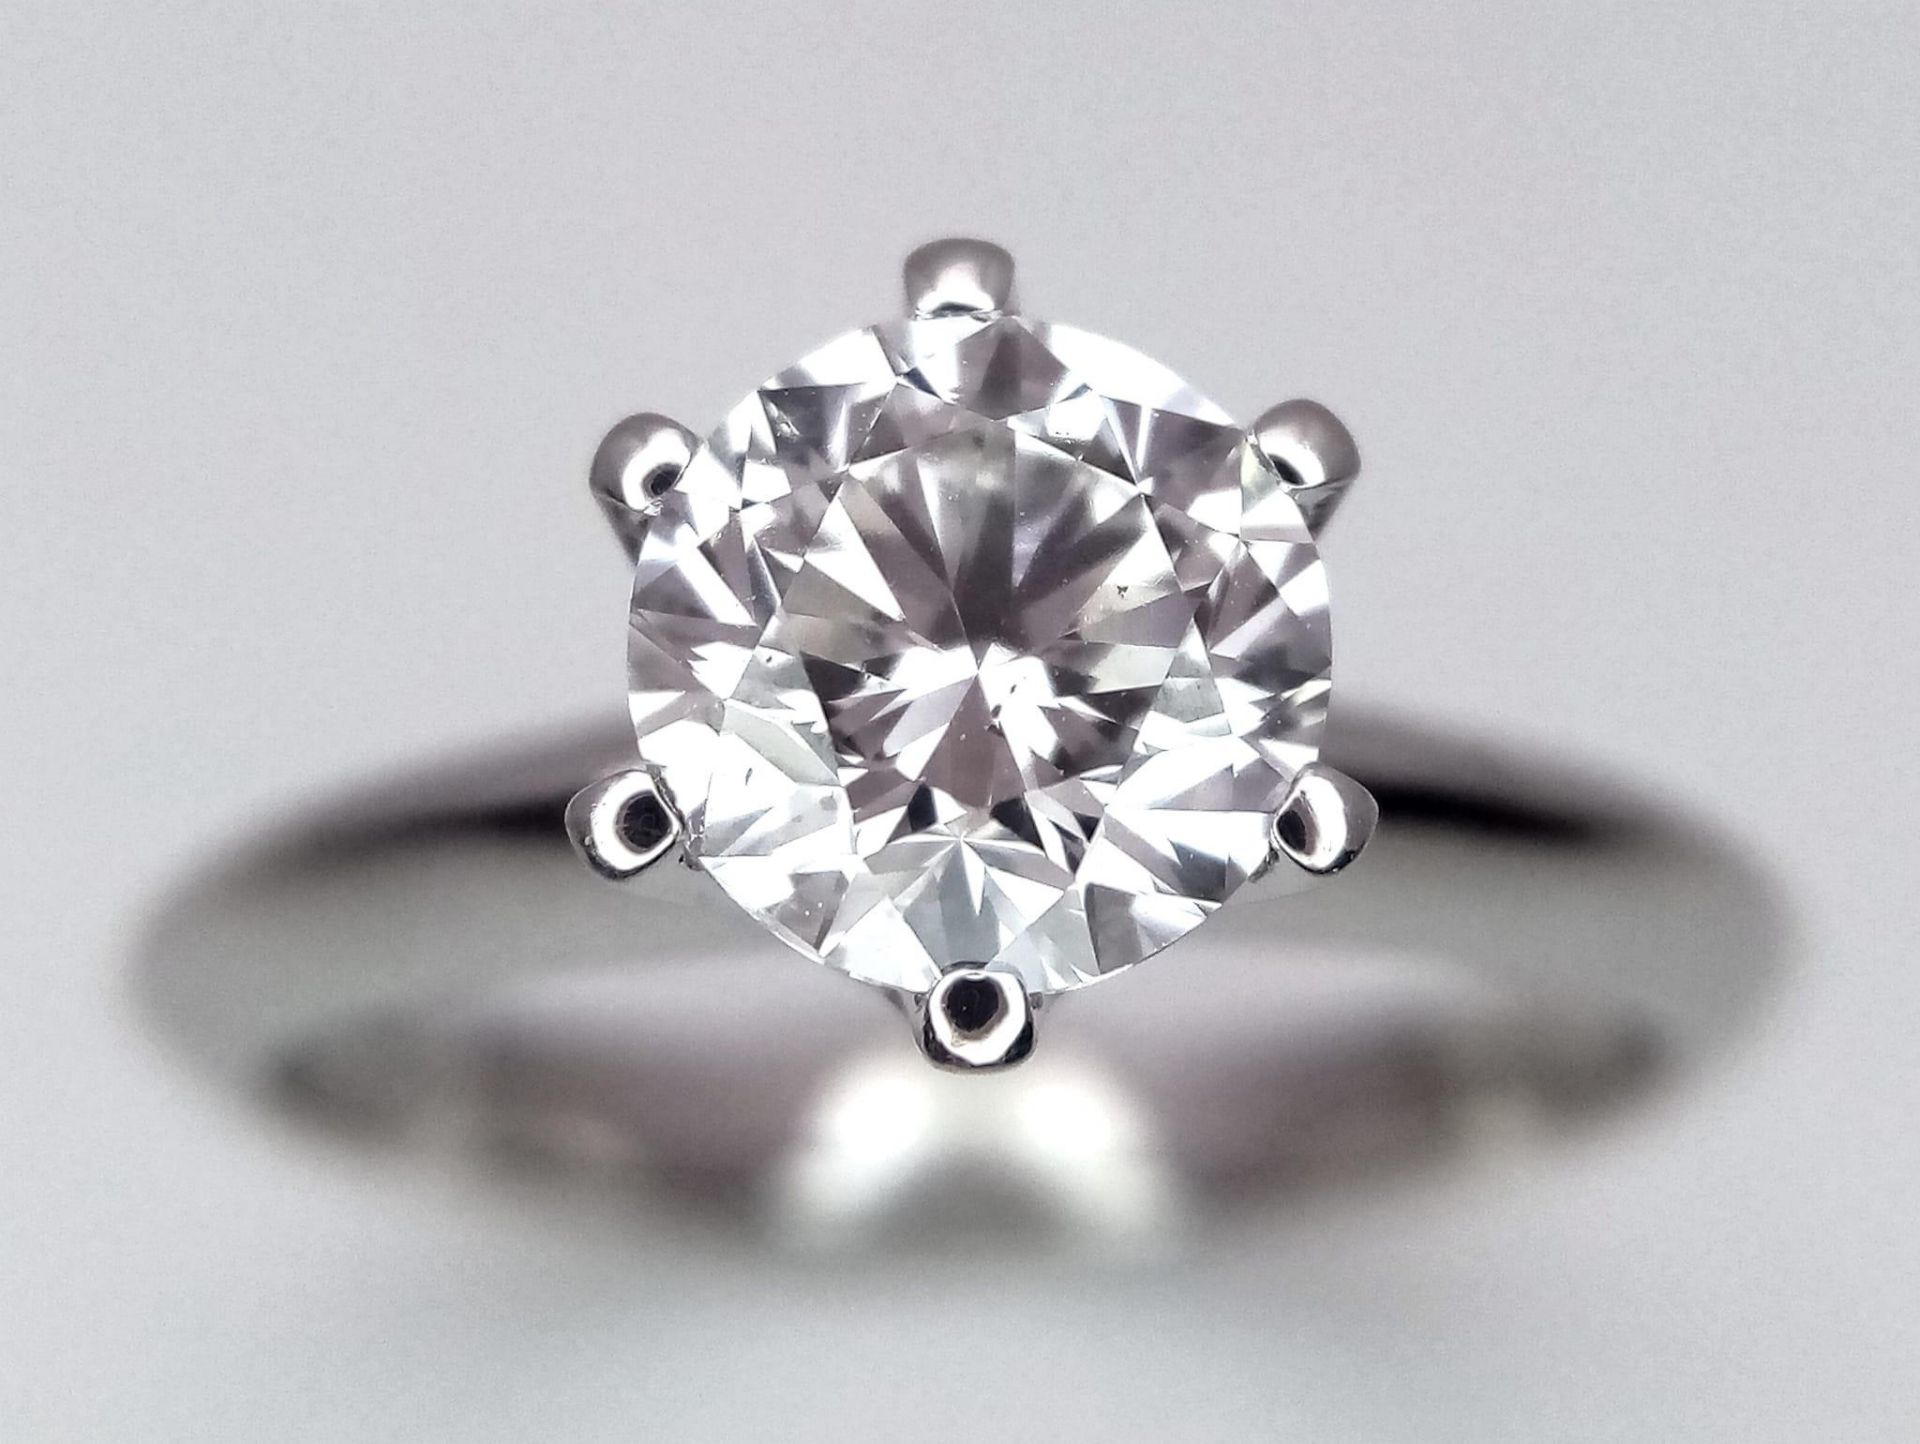 An 18K white Gold 1ct Diamond Solitaire Ring. Brilliant round cut diamond. Comes with an IGI